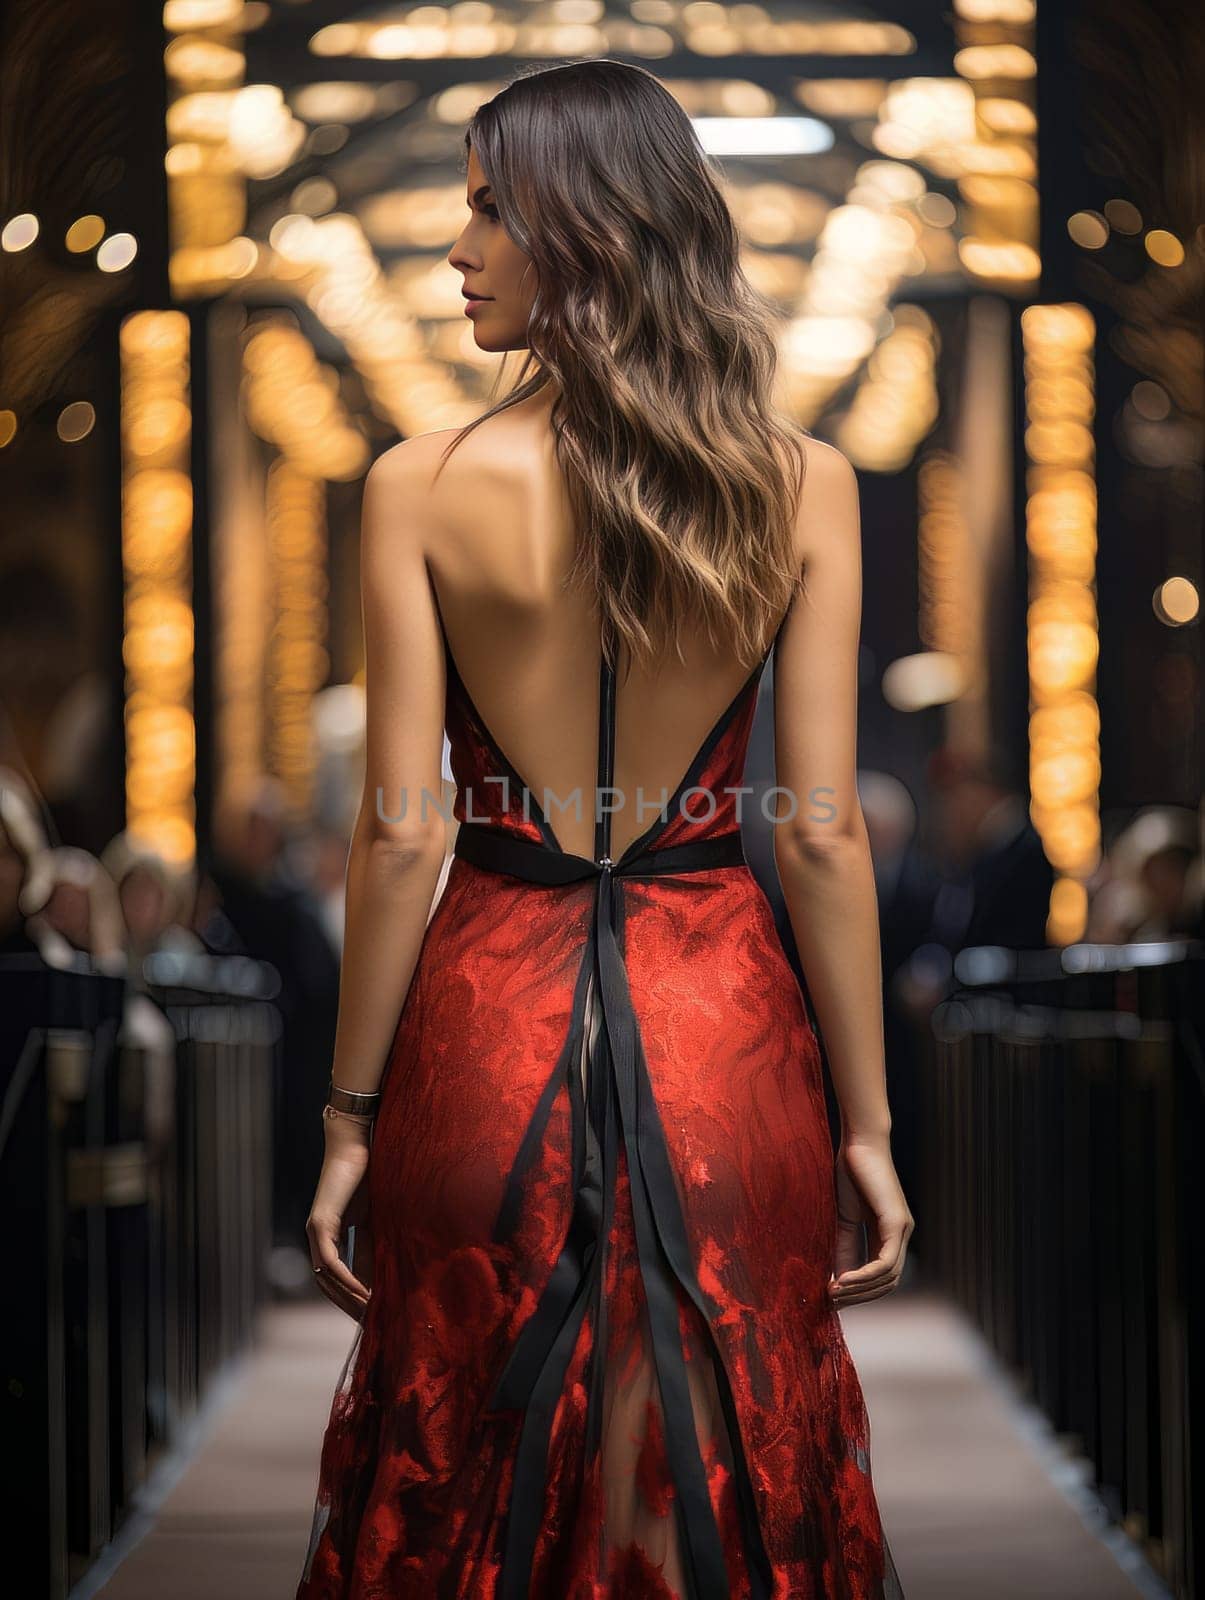 Fictional sexy woman in a luxurious red dress on the red carpet AI by but_photo